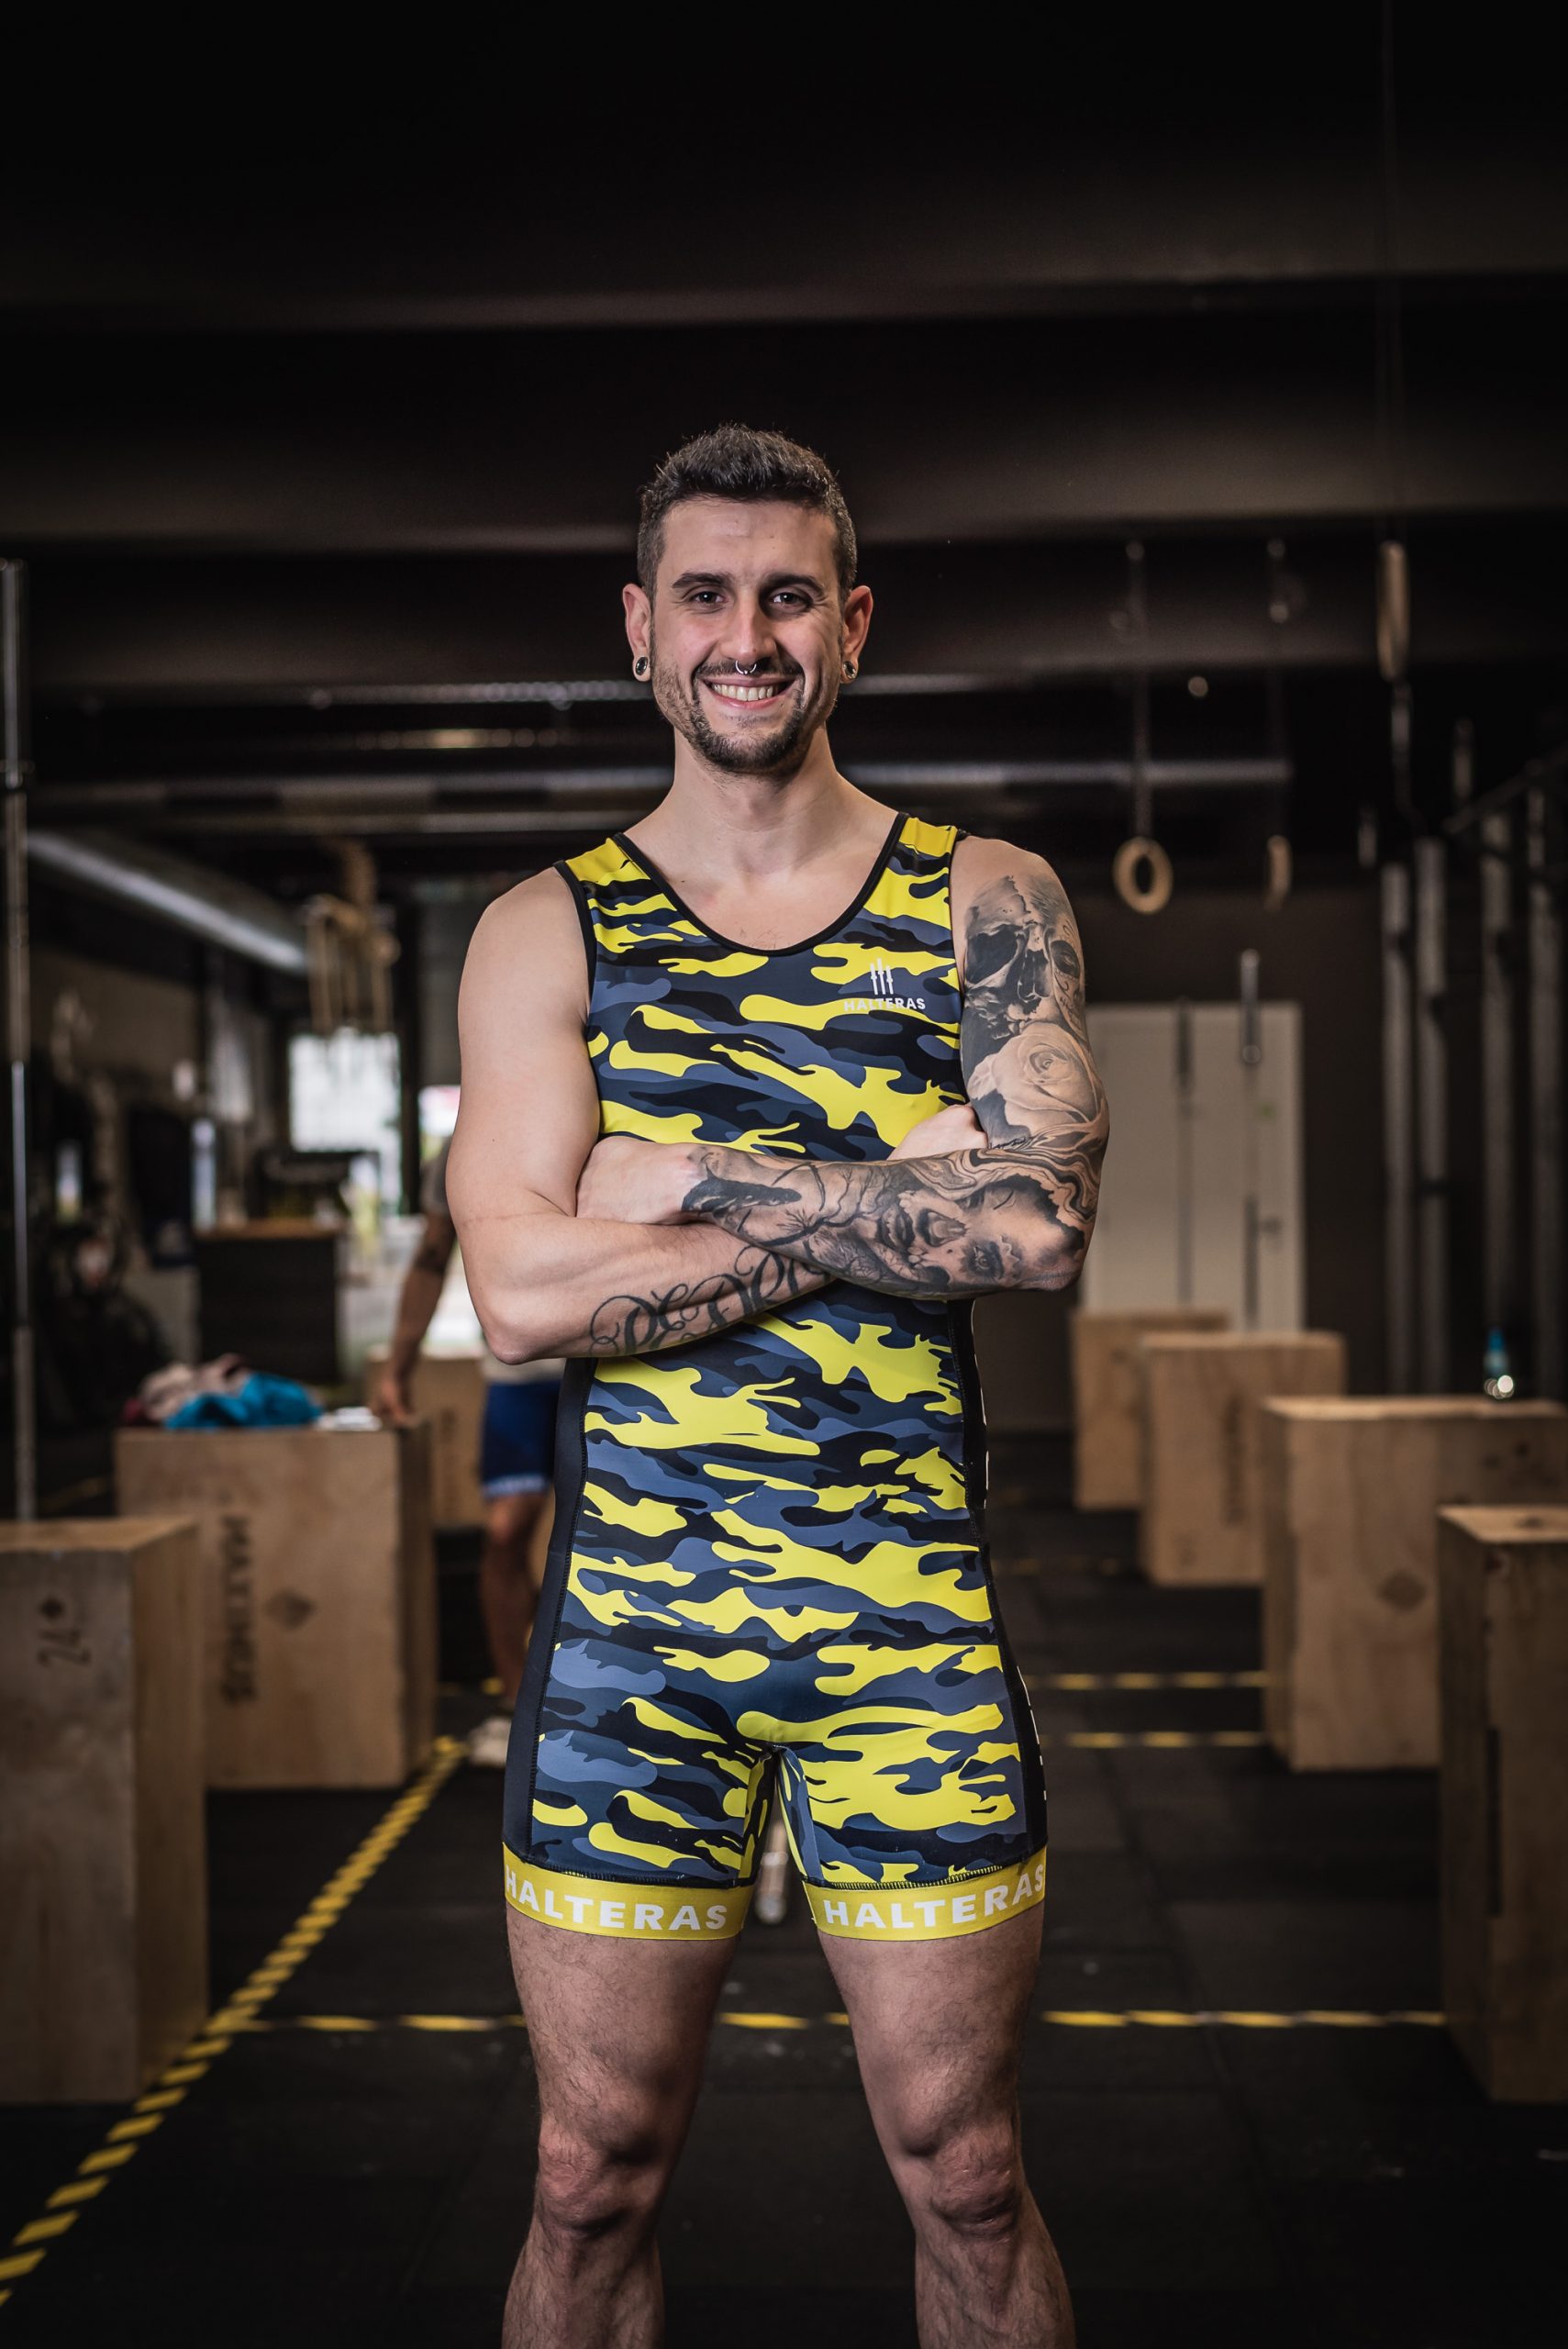 Maillot duty para weightlifting hombre